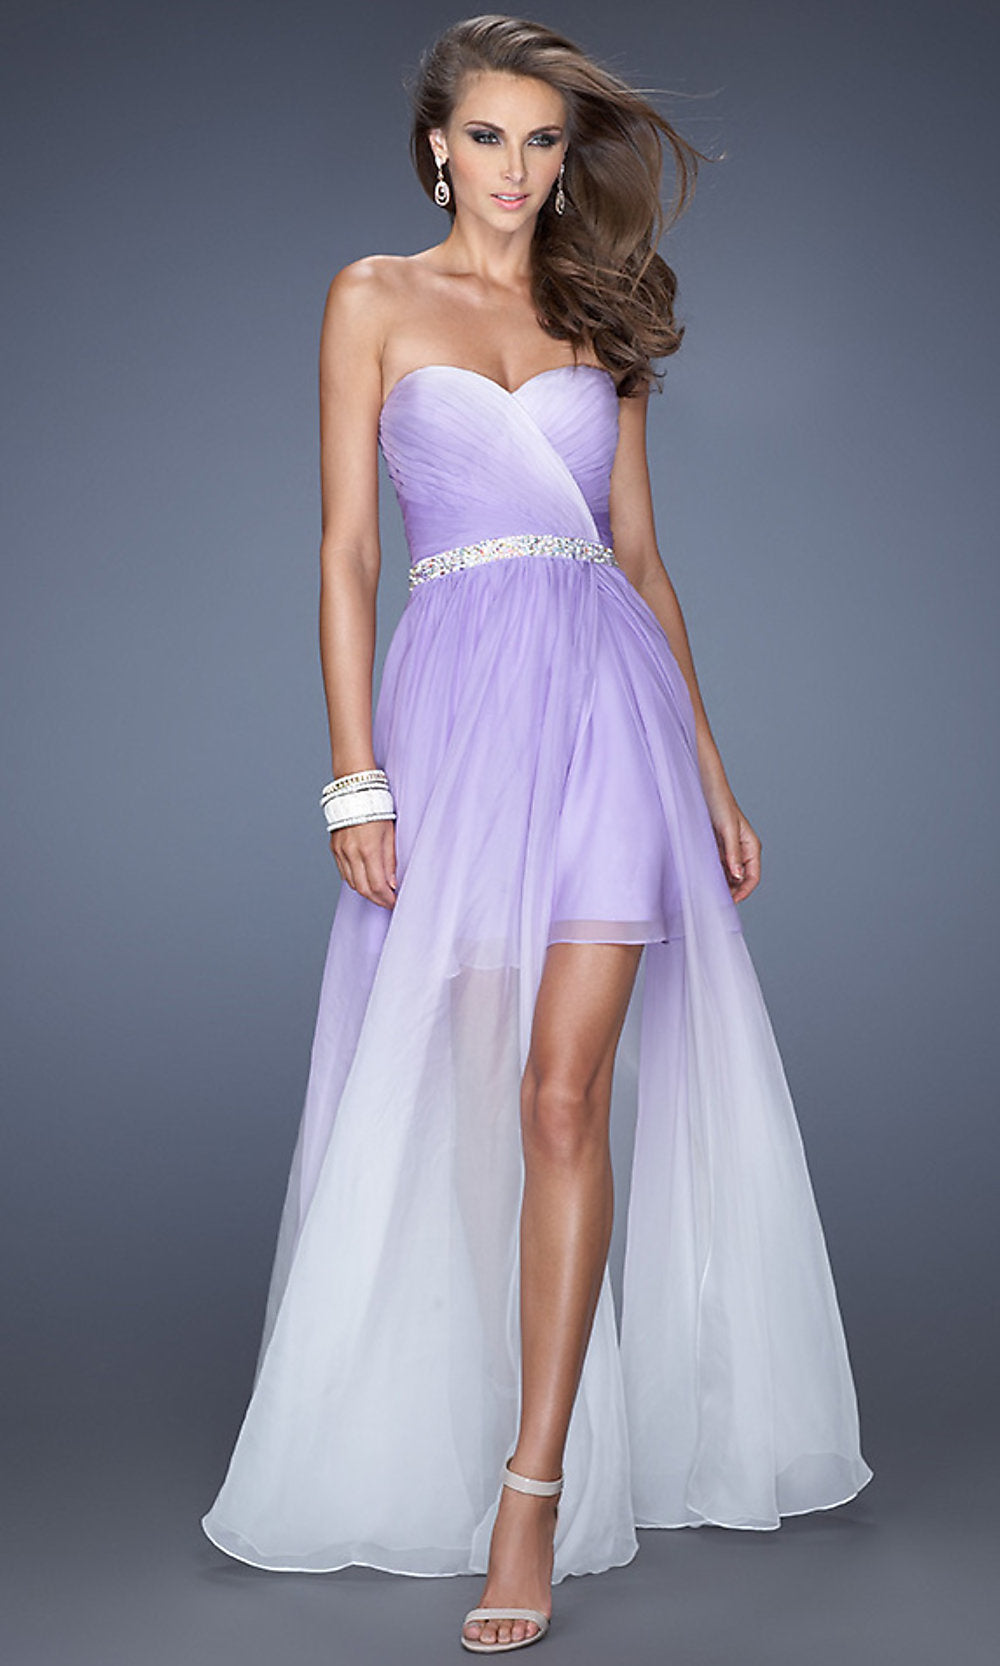 Wisteria La Femme Strapless Ombre High-Low Prom Dress